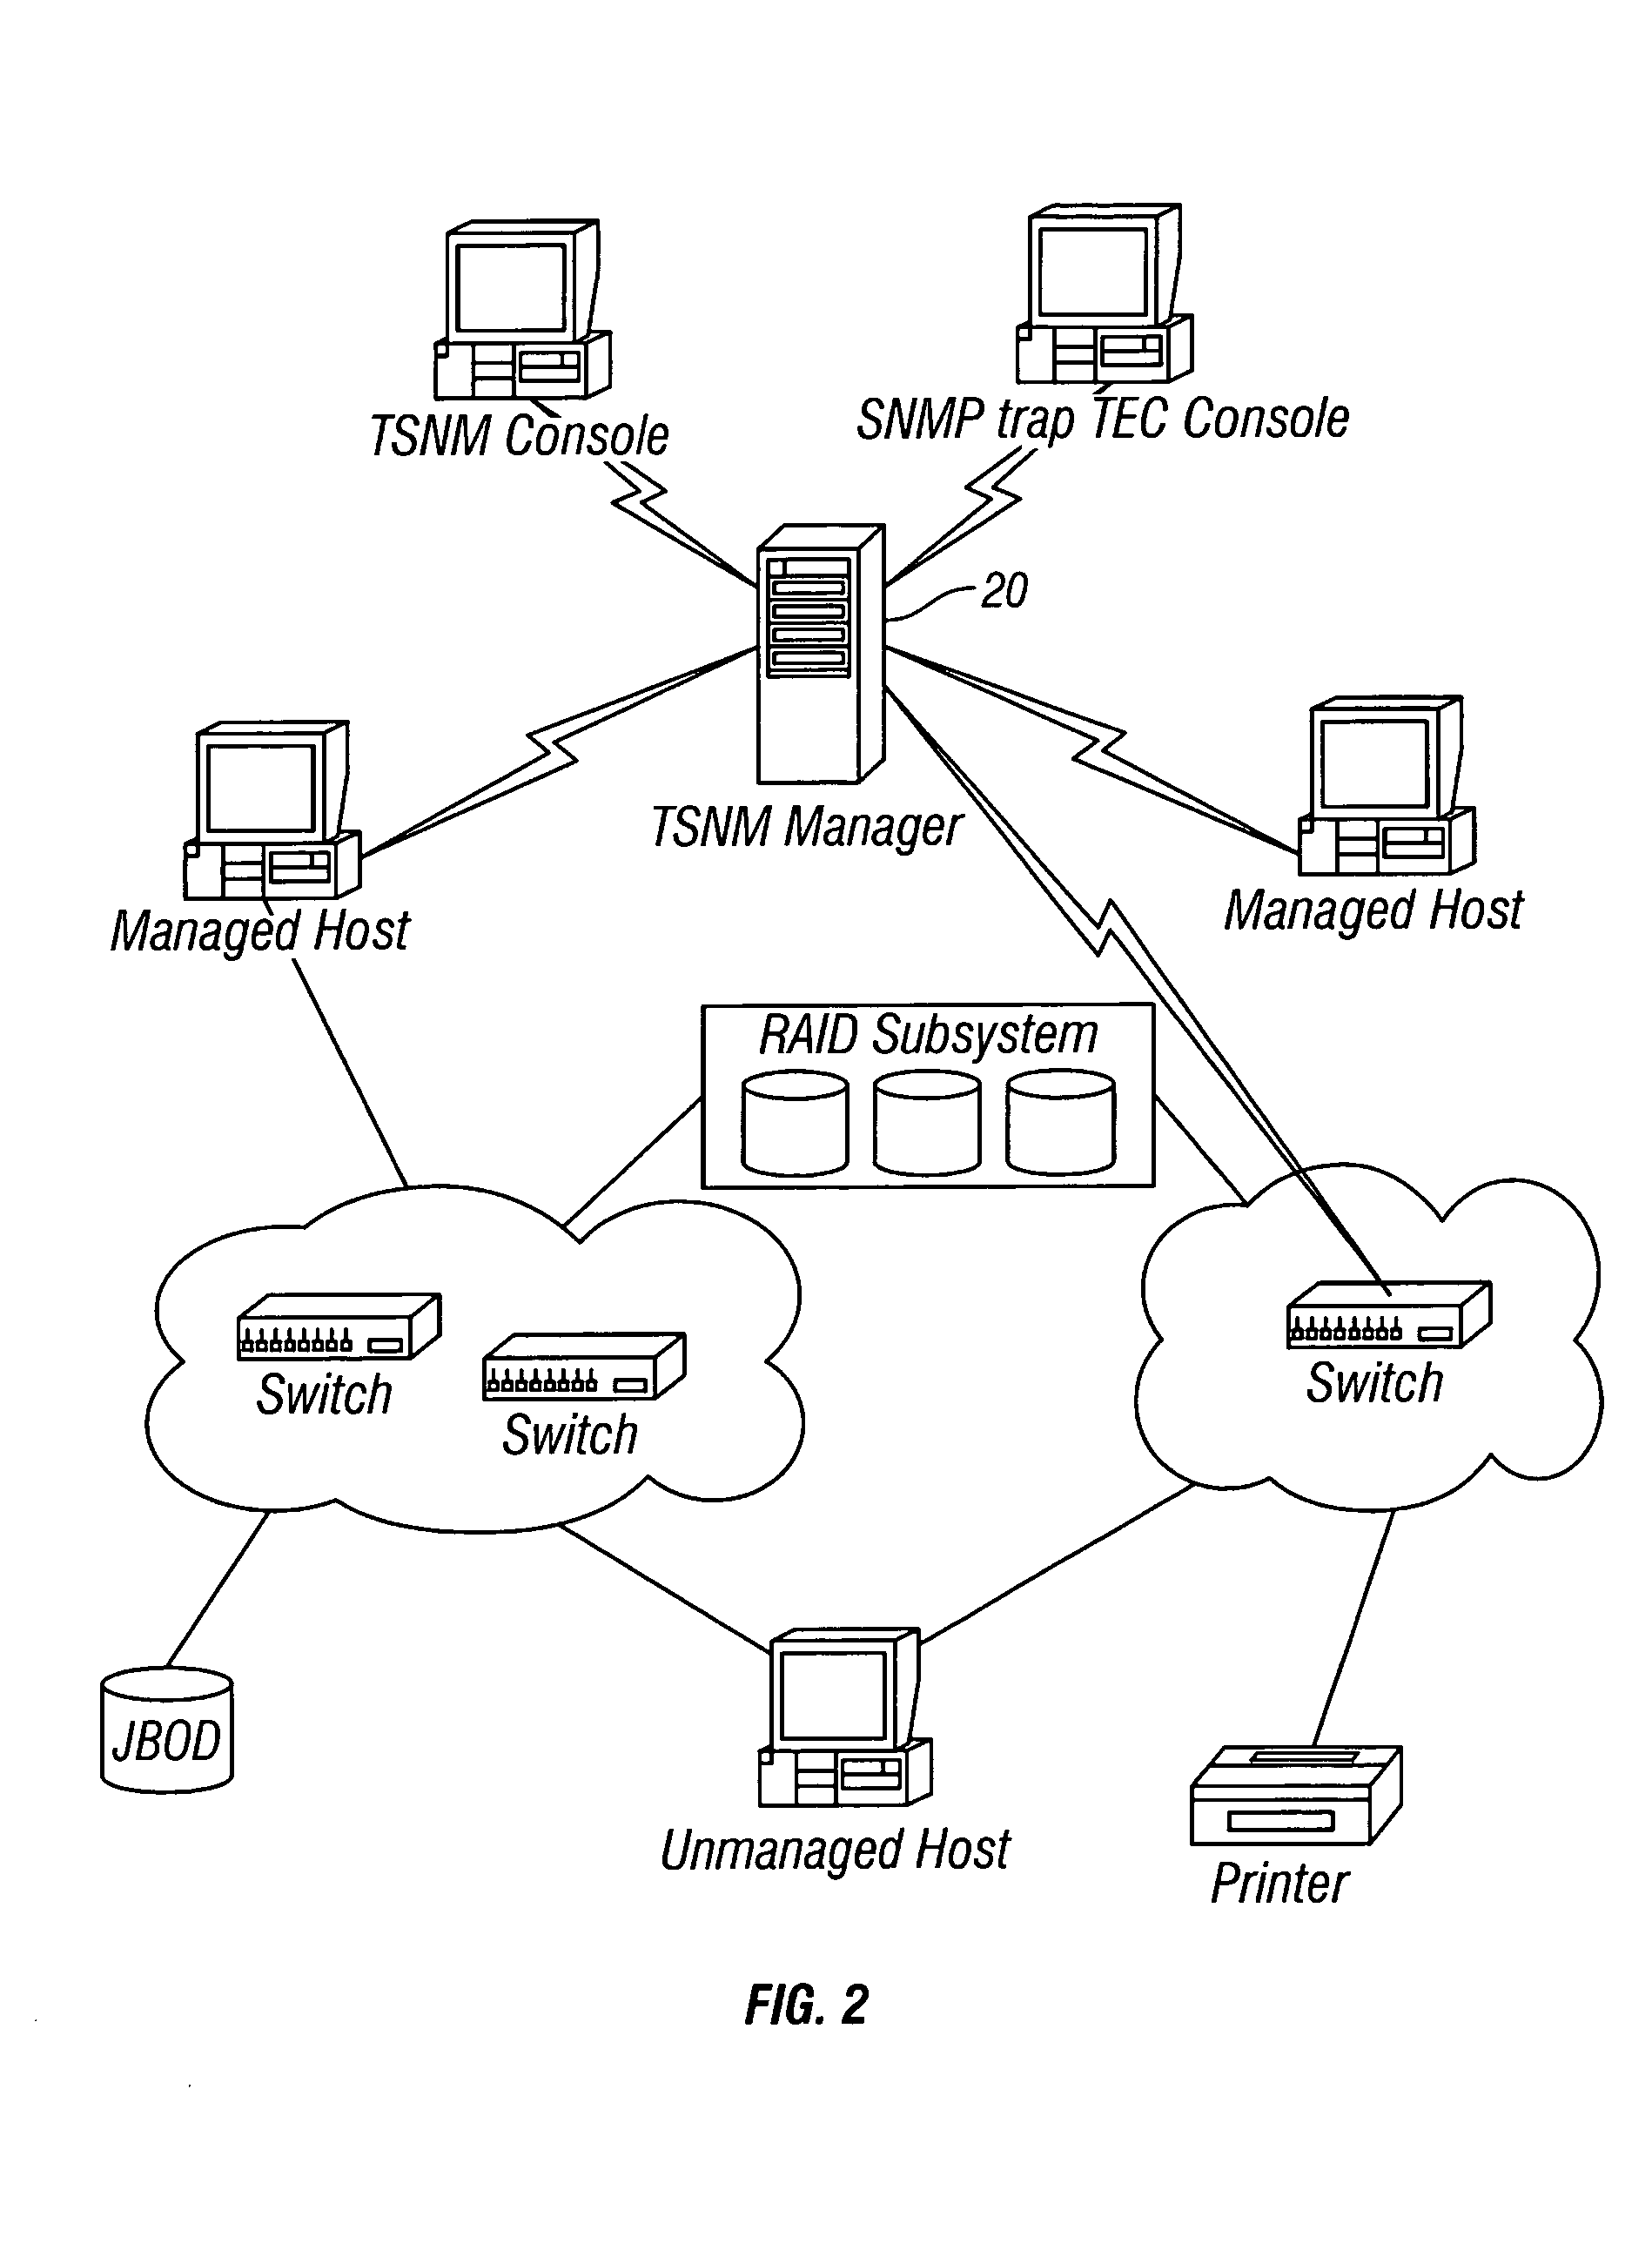 Storage area network methods and apparatus for validating data from multiple sources